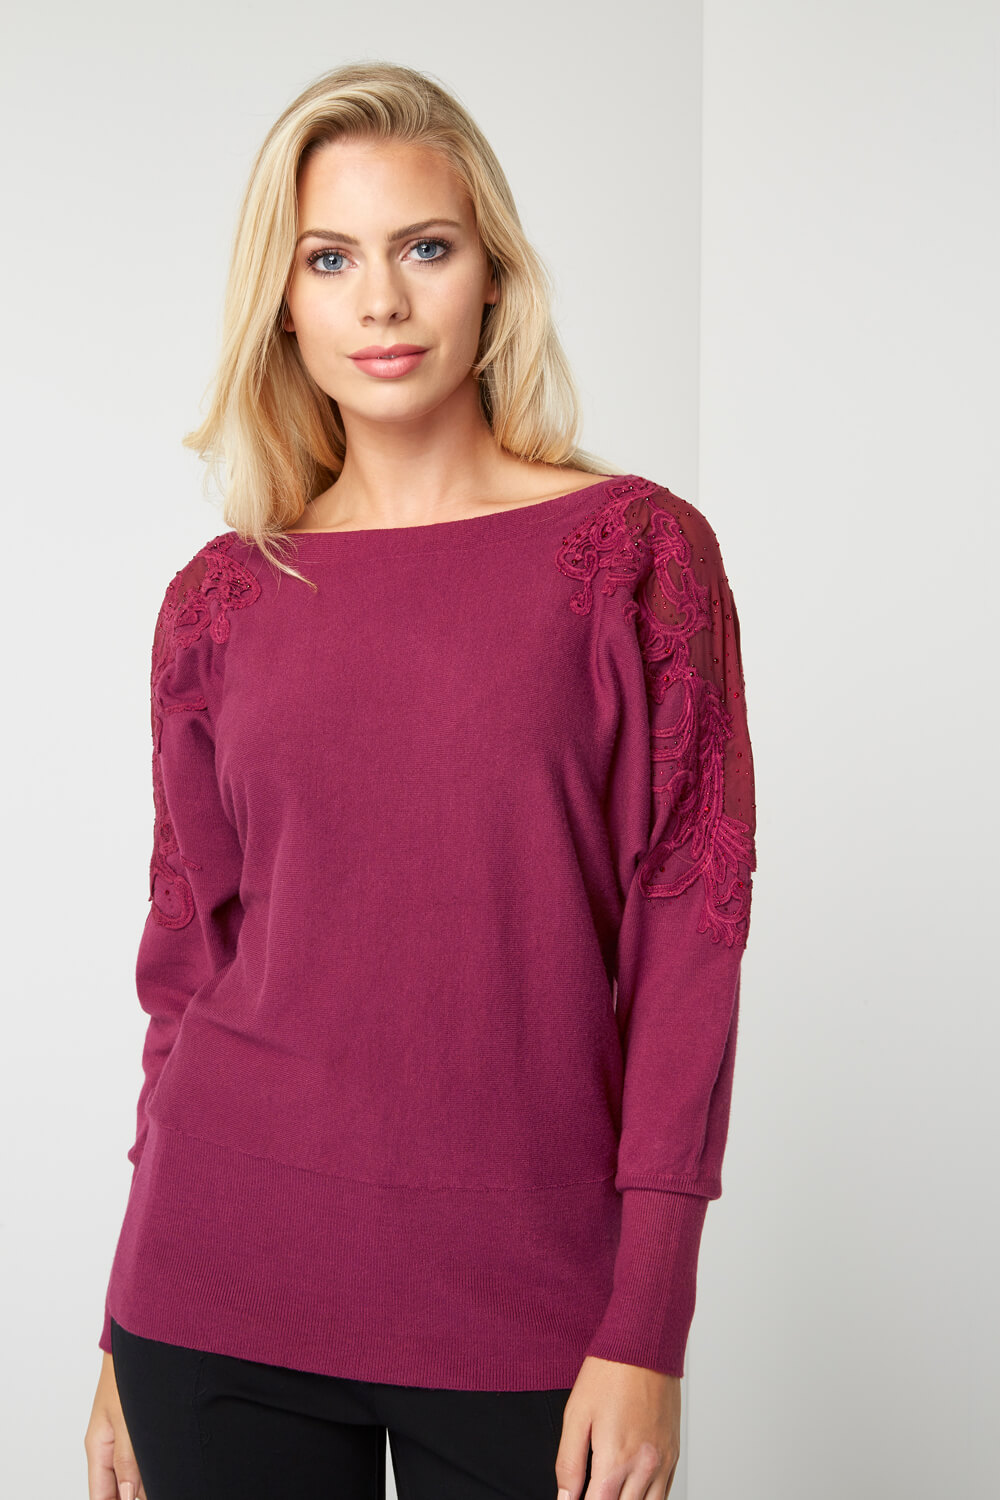 Red Lace Detail Jumper, Image 2 of 4